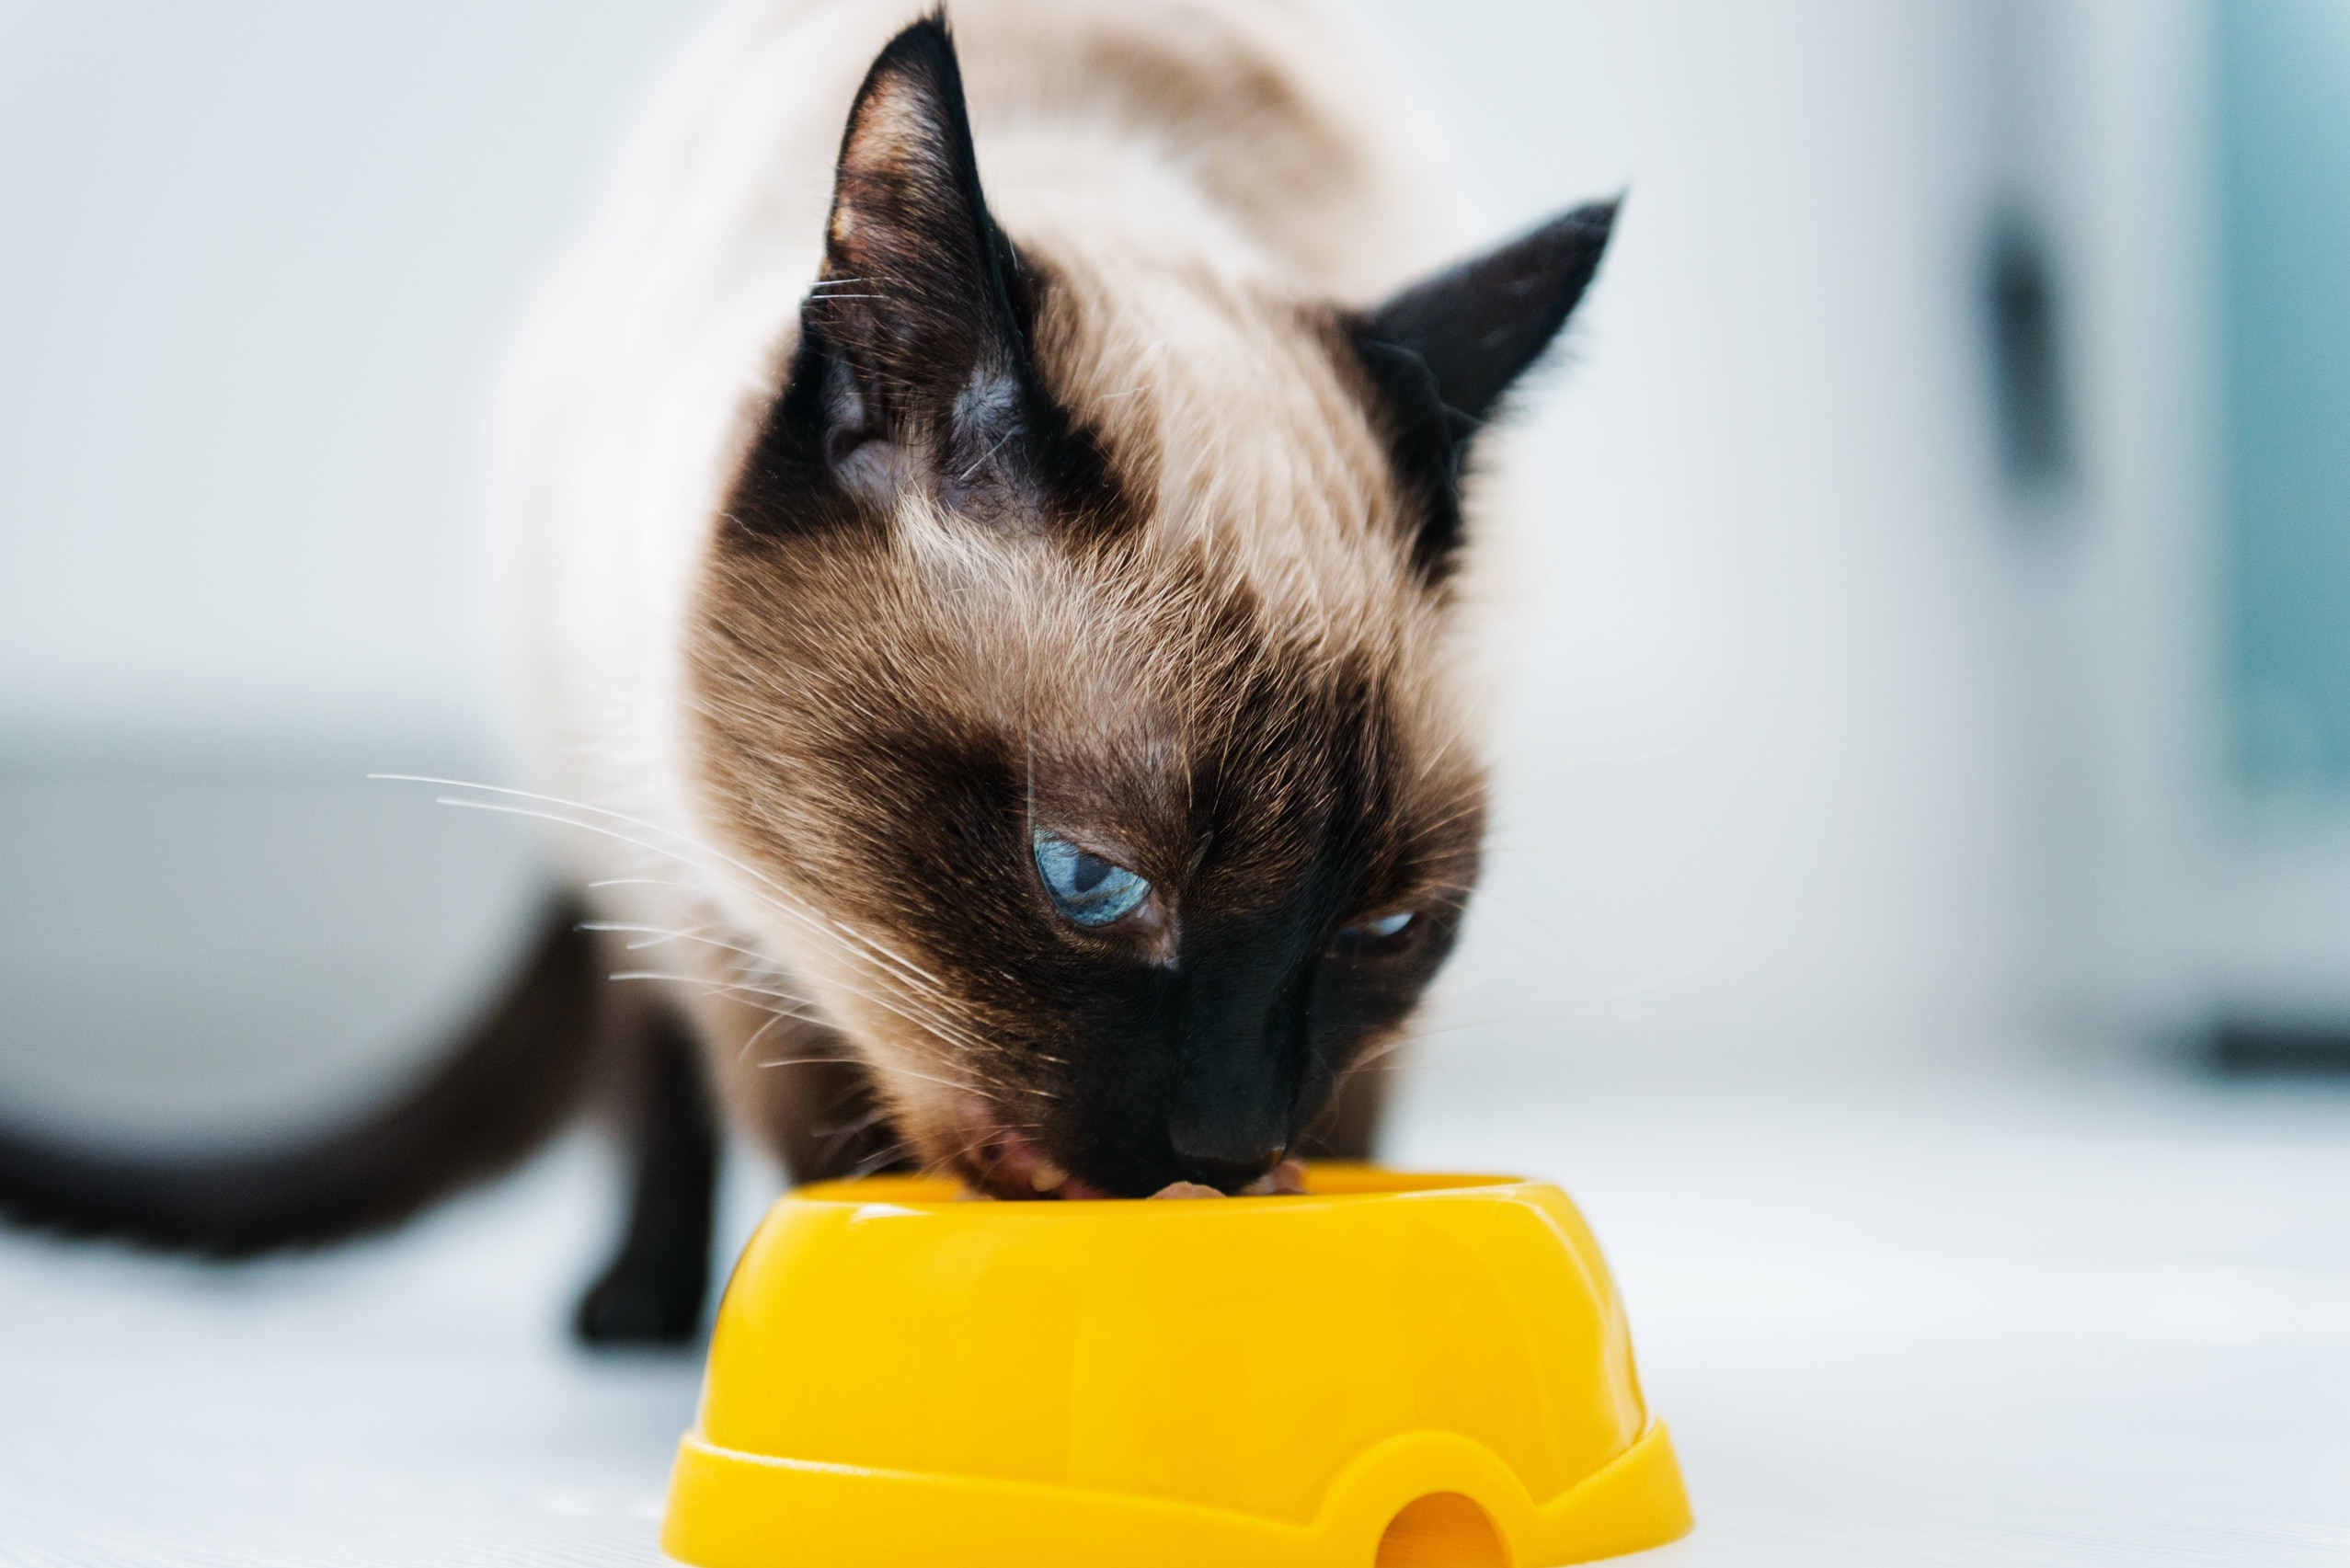 close-up shot of a siamese cat eating from a yellow bowl